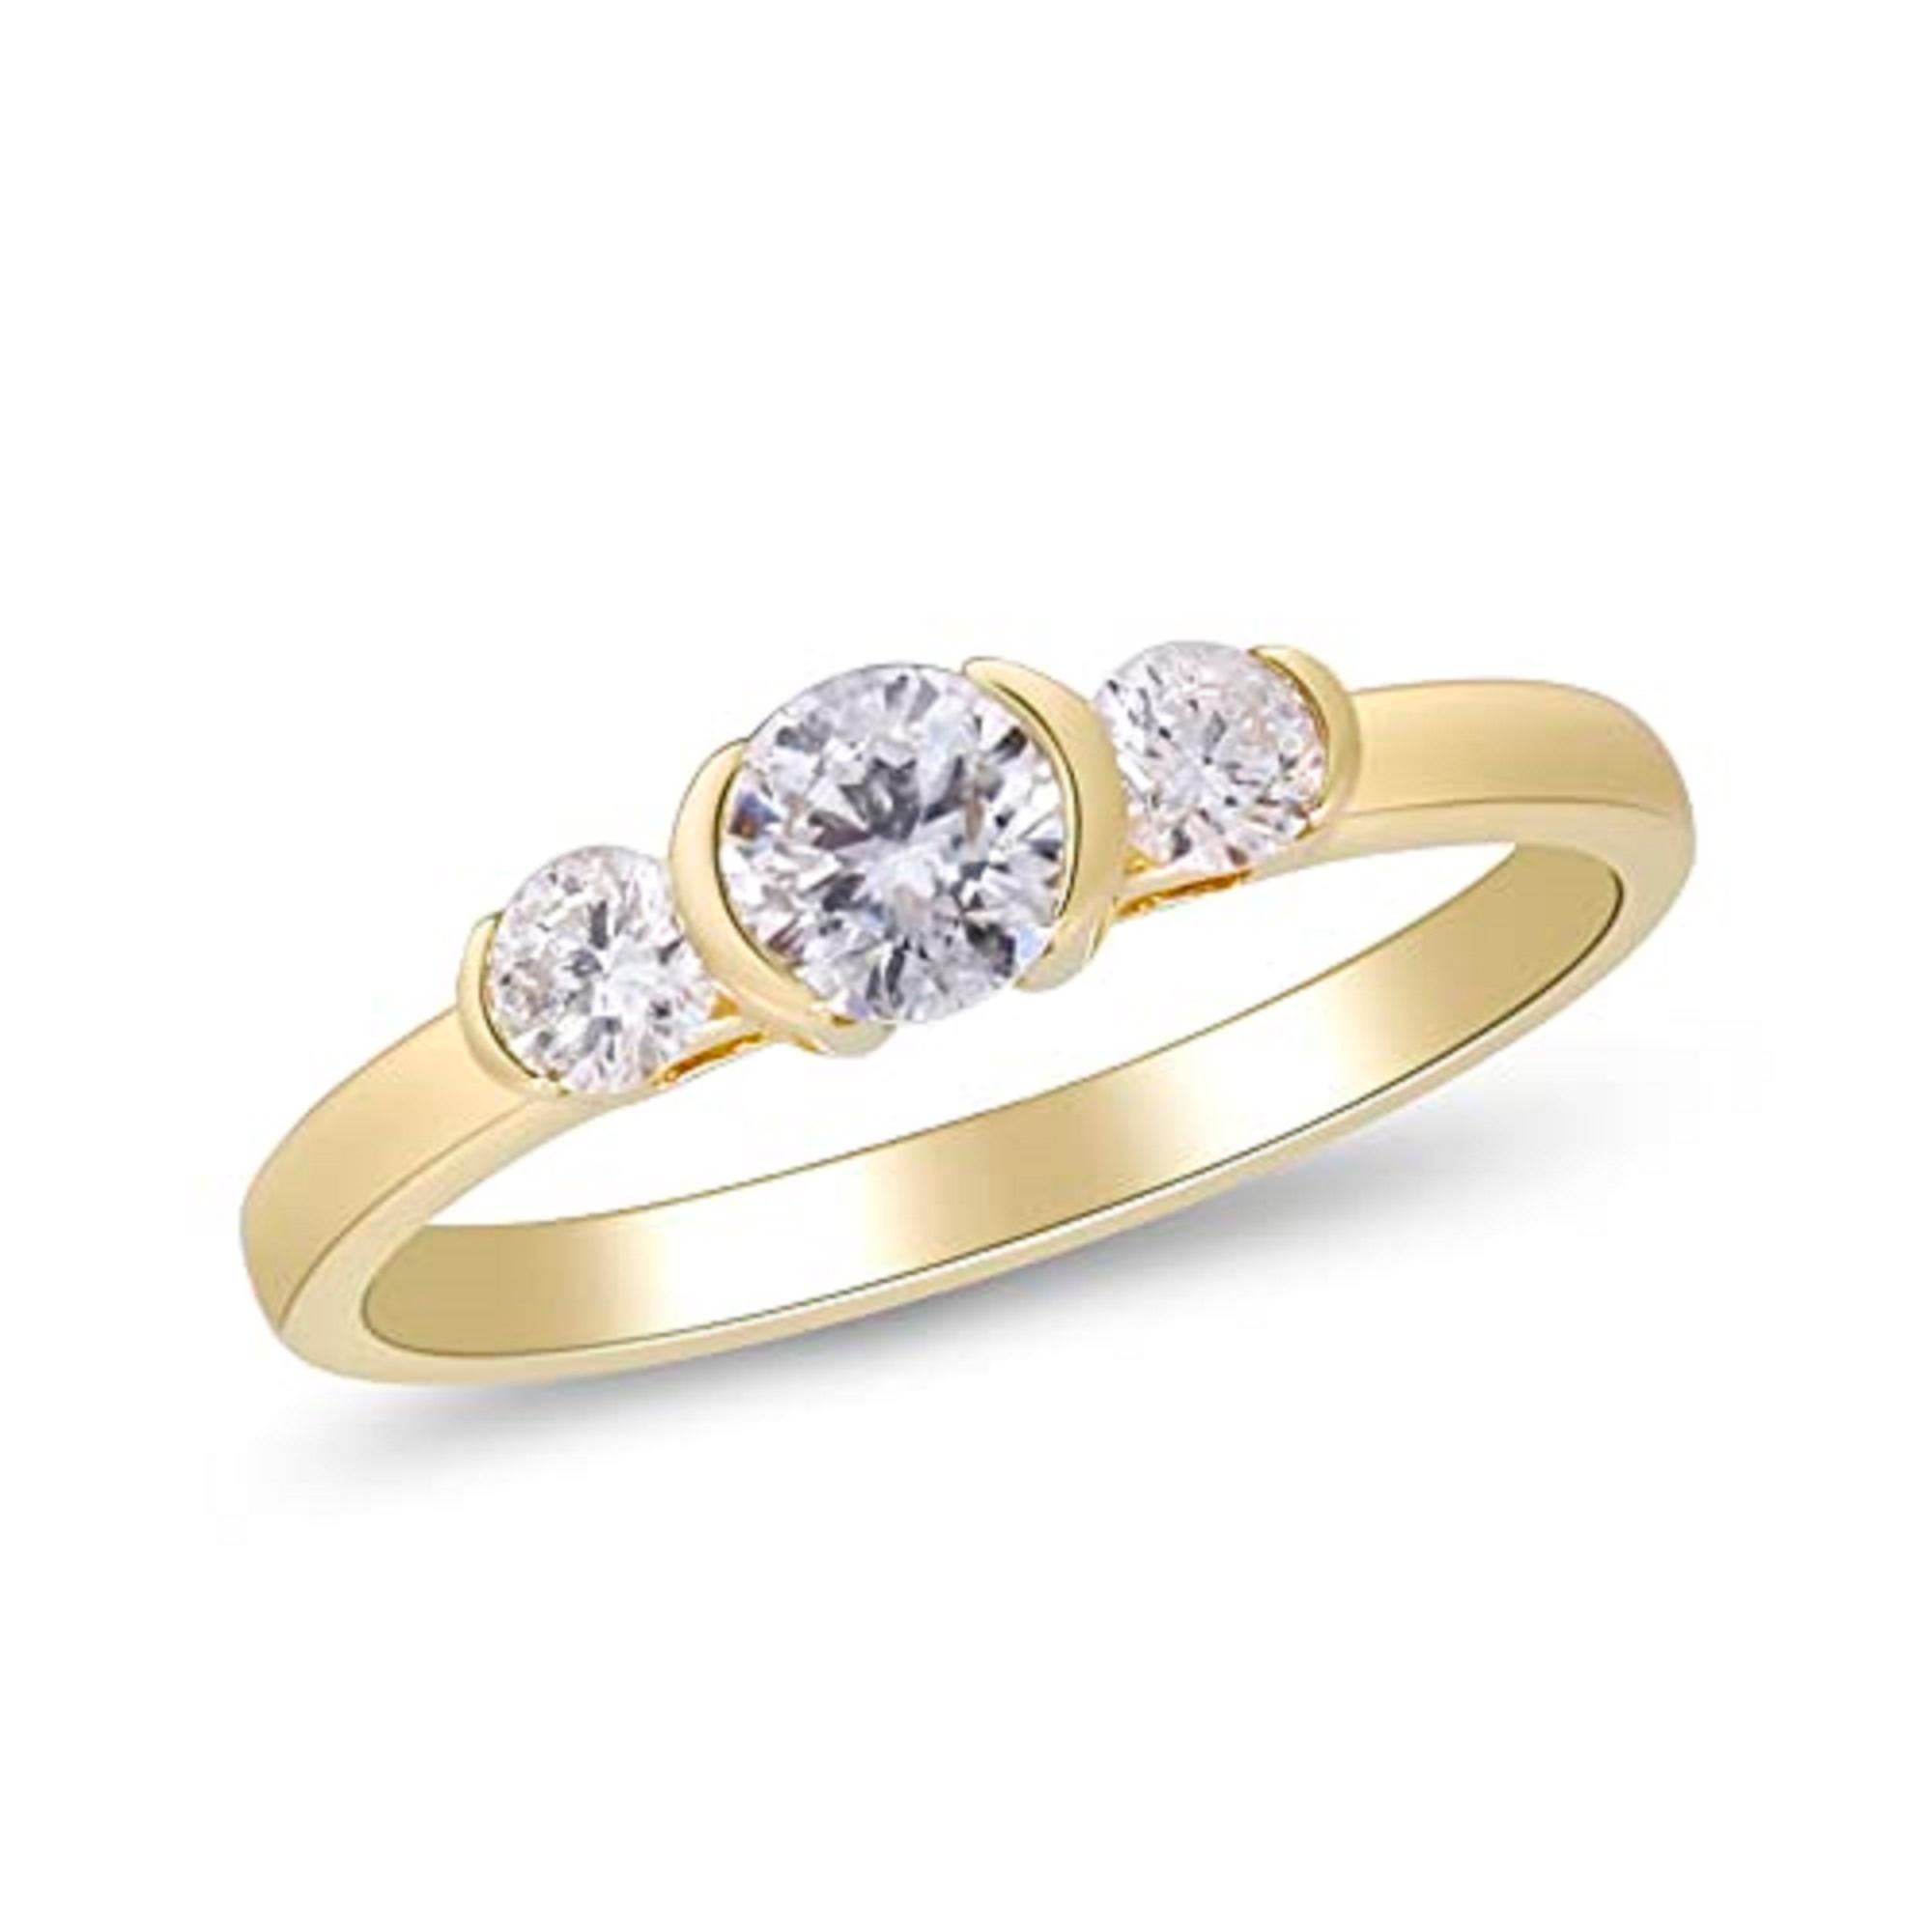 Decorate yourself in elegance with this Ring is crafted from 14-karat Yellow Gold by Gin & Grace. This Ring is made up of round-cut white diamond (1 pcs) 0.50 carat and round-cut white diamond (2 pcs) 0.26 carat. This Ring is weight 2.68 grams. This